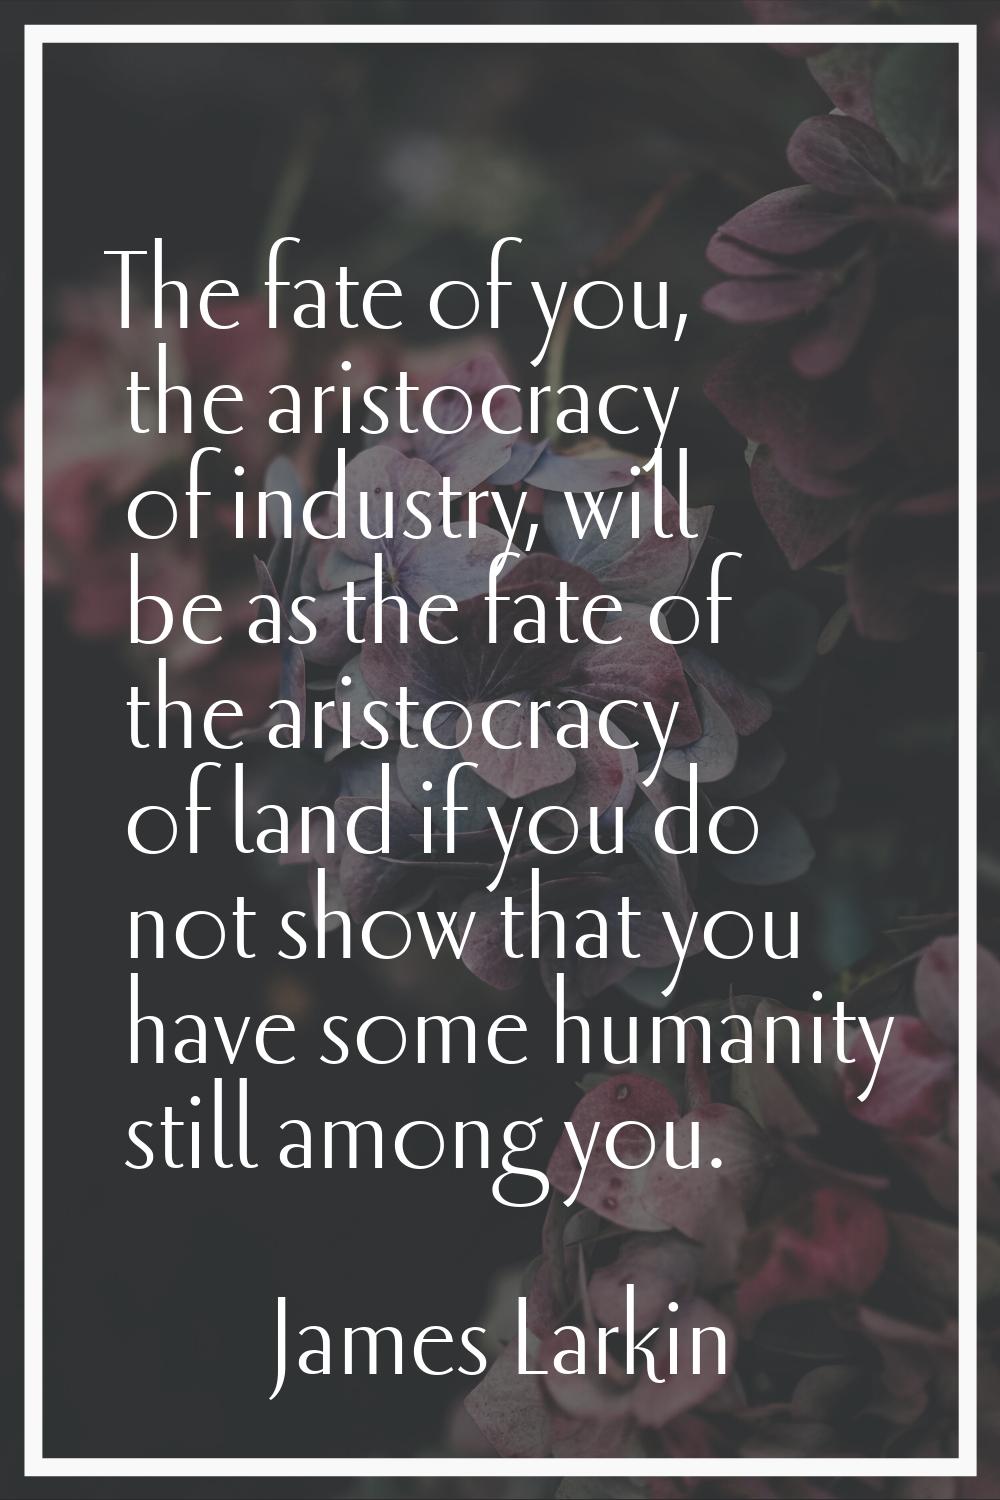 The fate of you, the aristocracy of industry, will be as the fate of the aristocracy of land if you